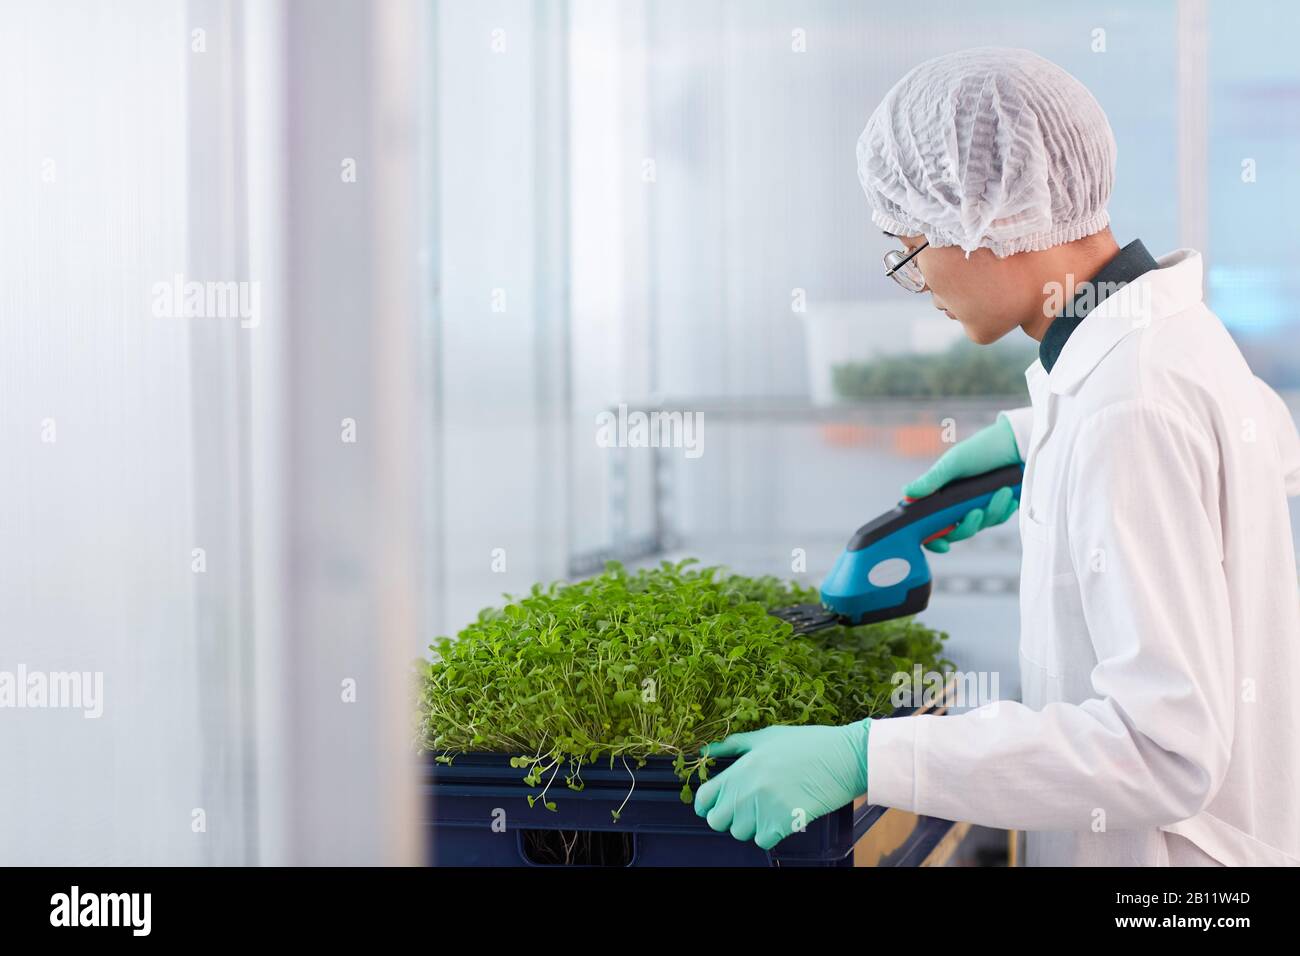 Asian farmer in white coat cutting plants in the box before seeding them Stock Photo